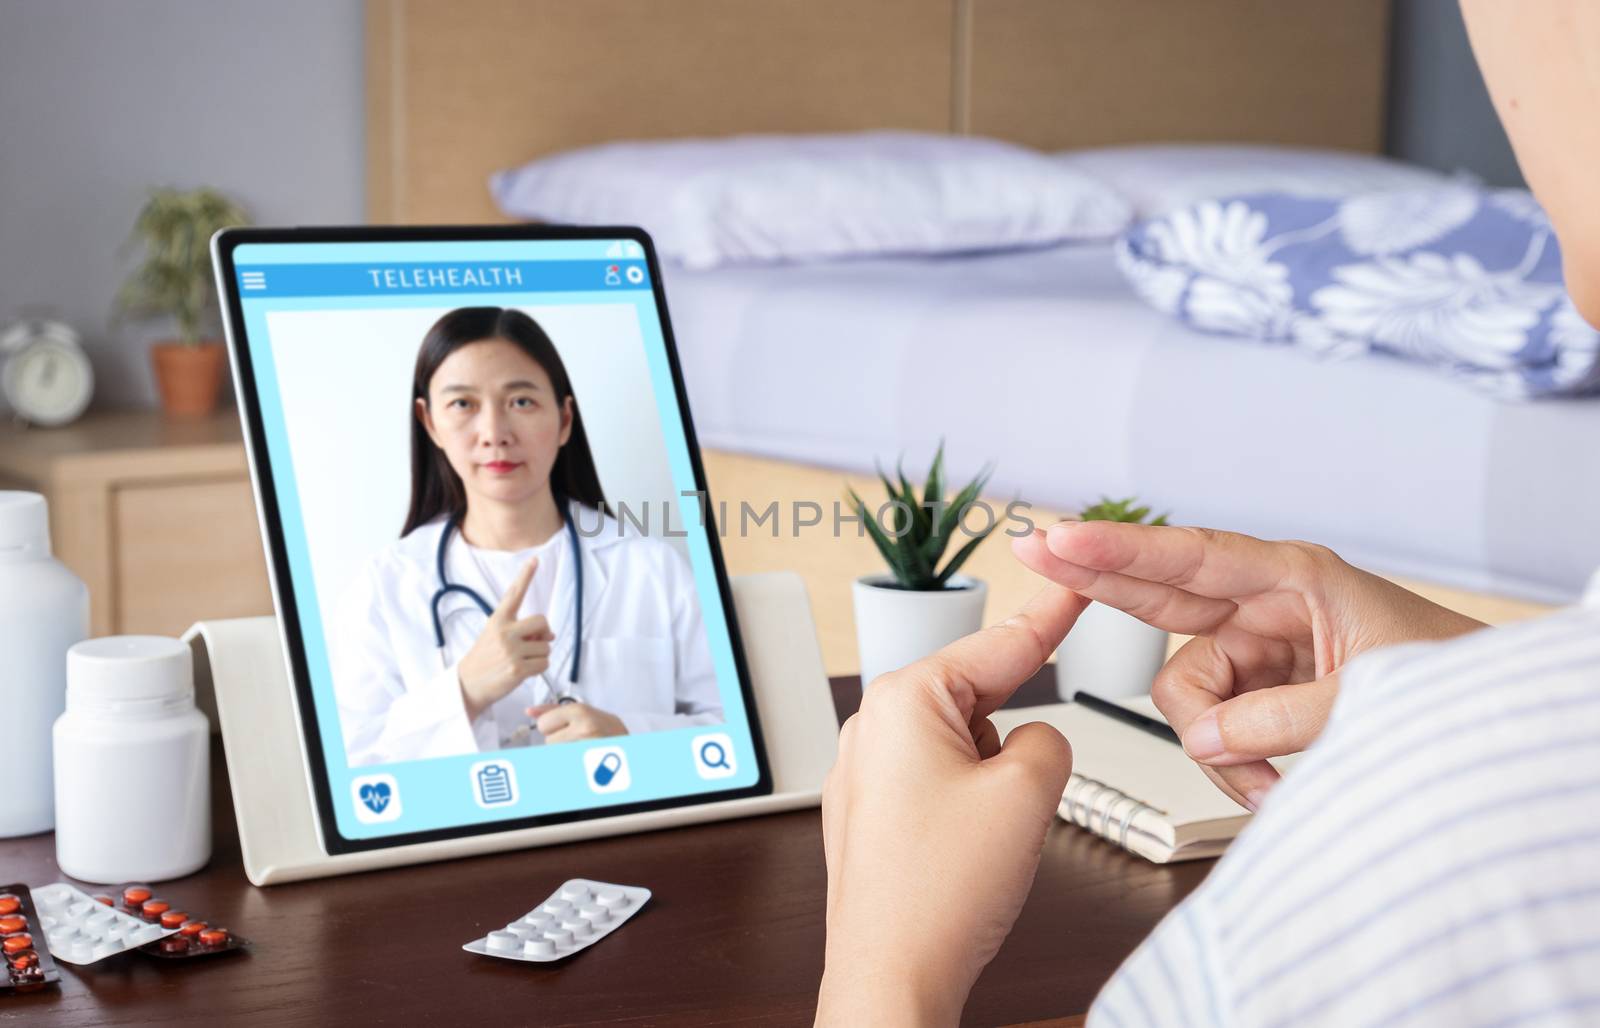 deaf mute patient use video conference, make online consultation by sign language with doctor on tablet application about illness, medicine via vdo call. Telehealth, Telemedicine, online hospital